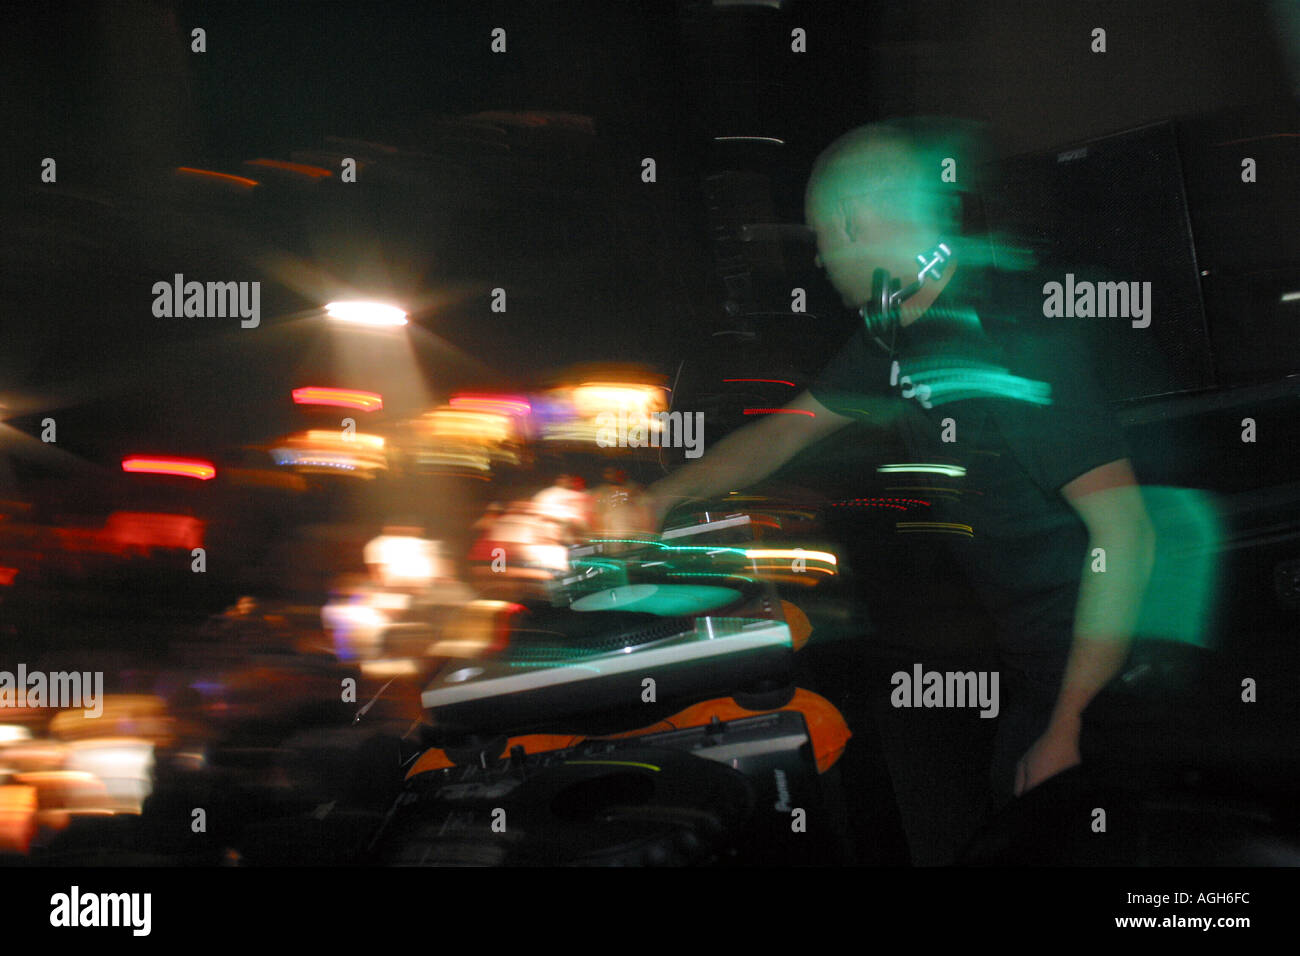 dj hyper playing at a club in tampa florida Stock Photo